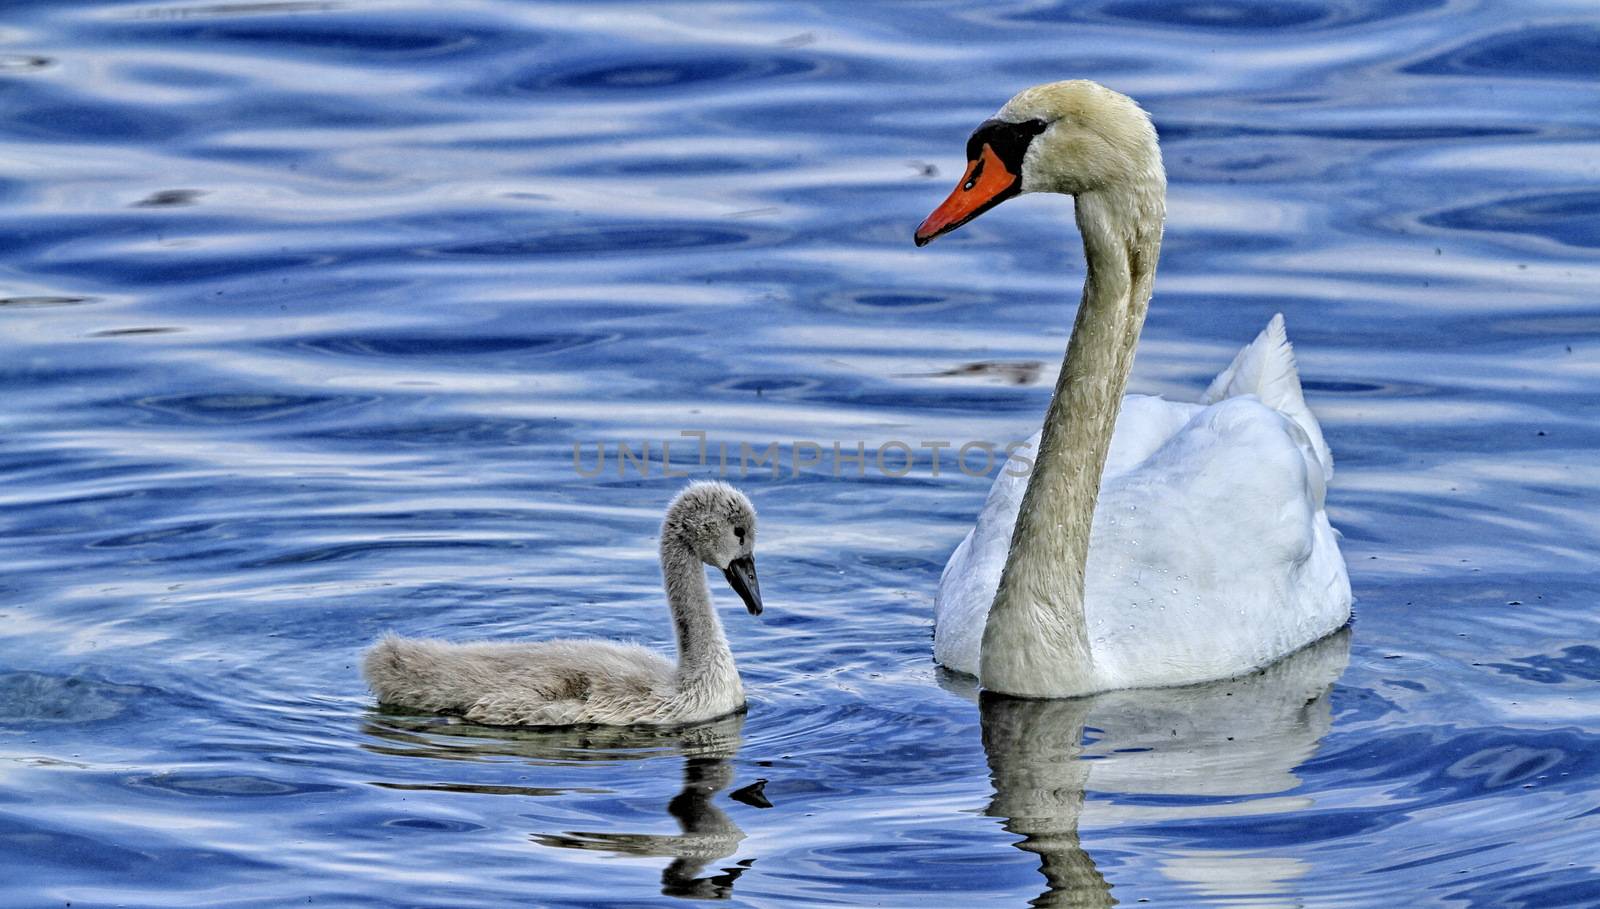 Mom swan with his baby on the water